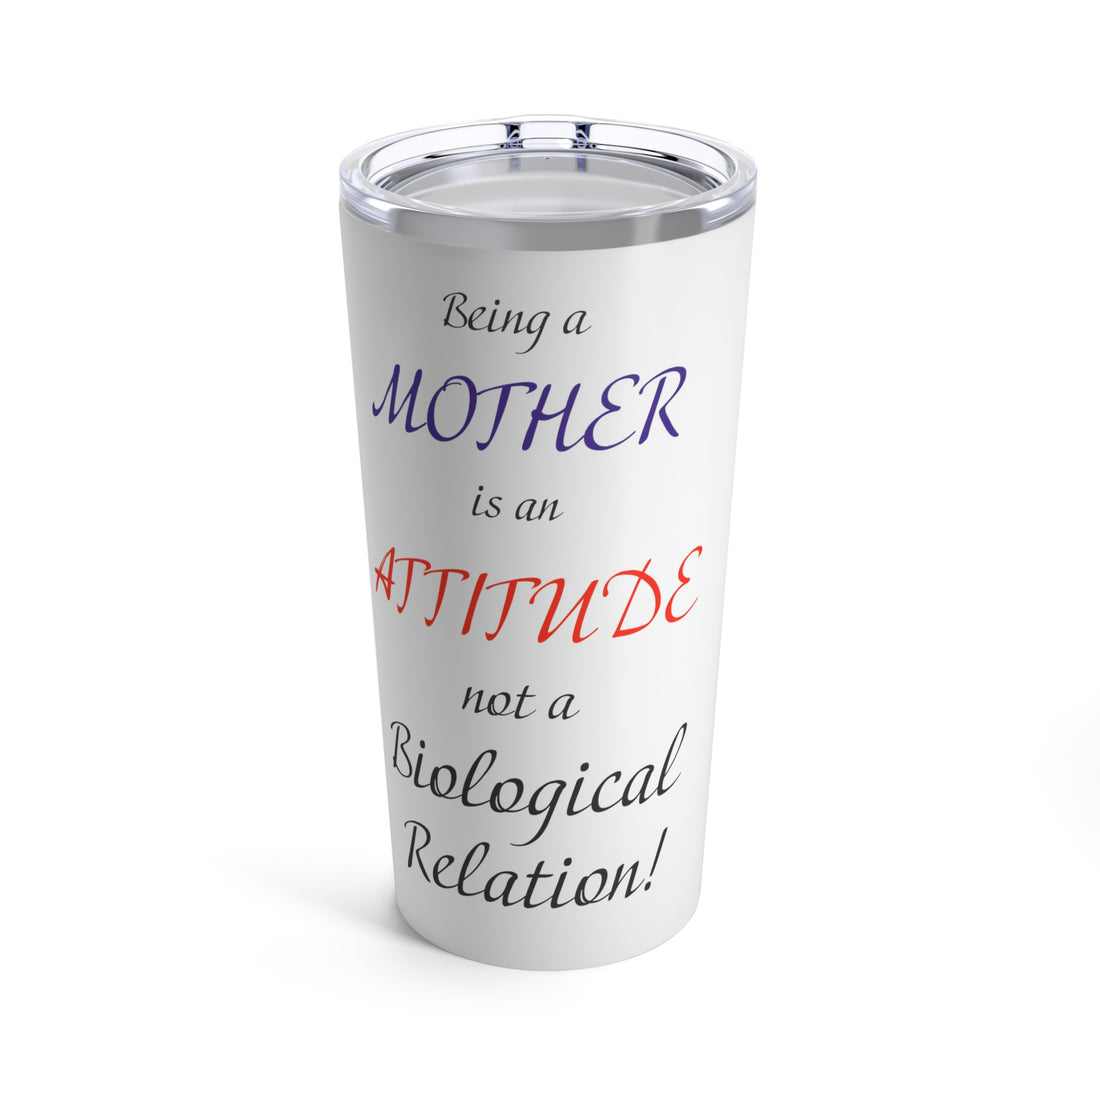 Being a mother is an Attitude not a Biological Relation - Tumbler 20oz